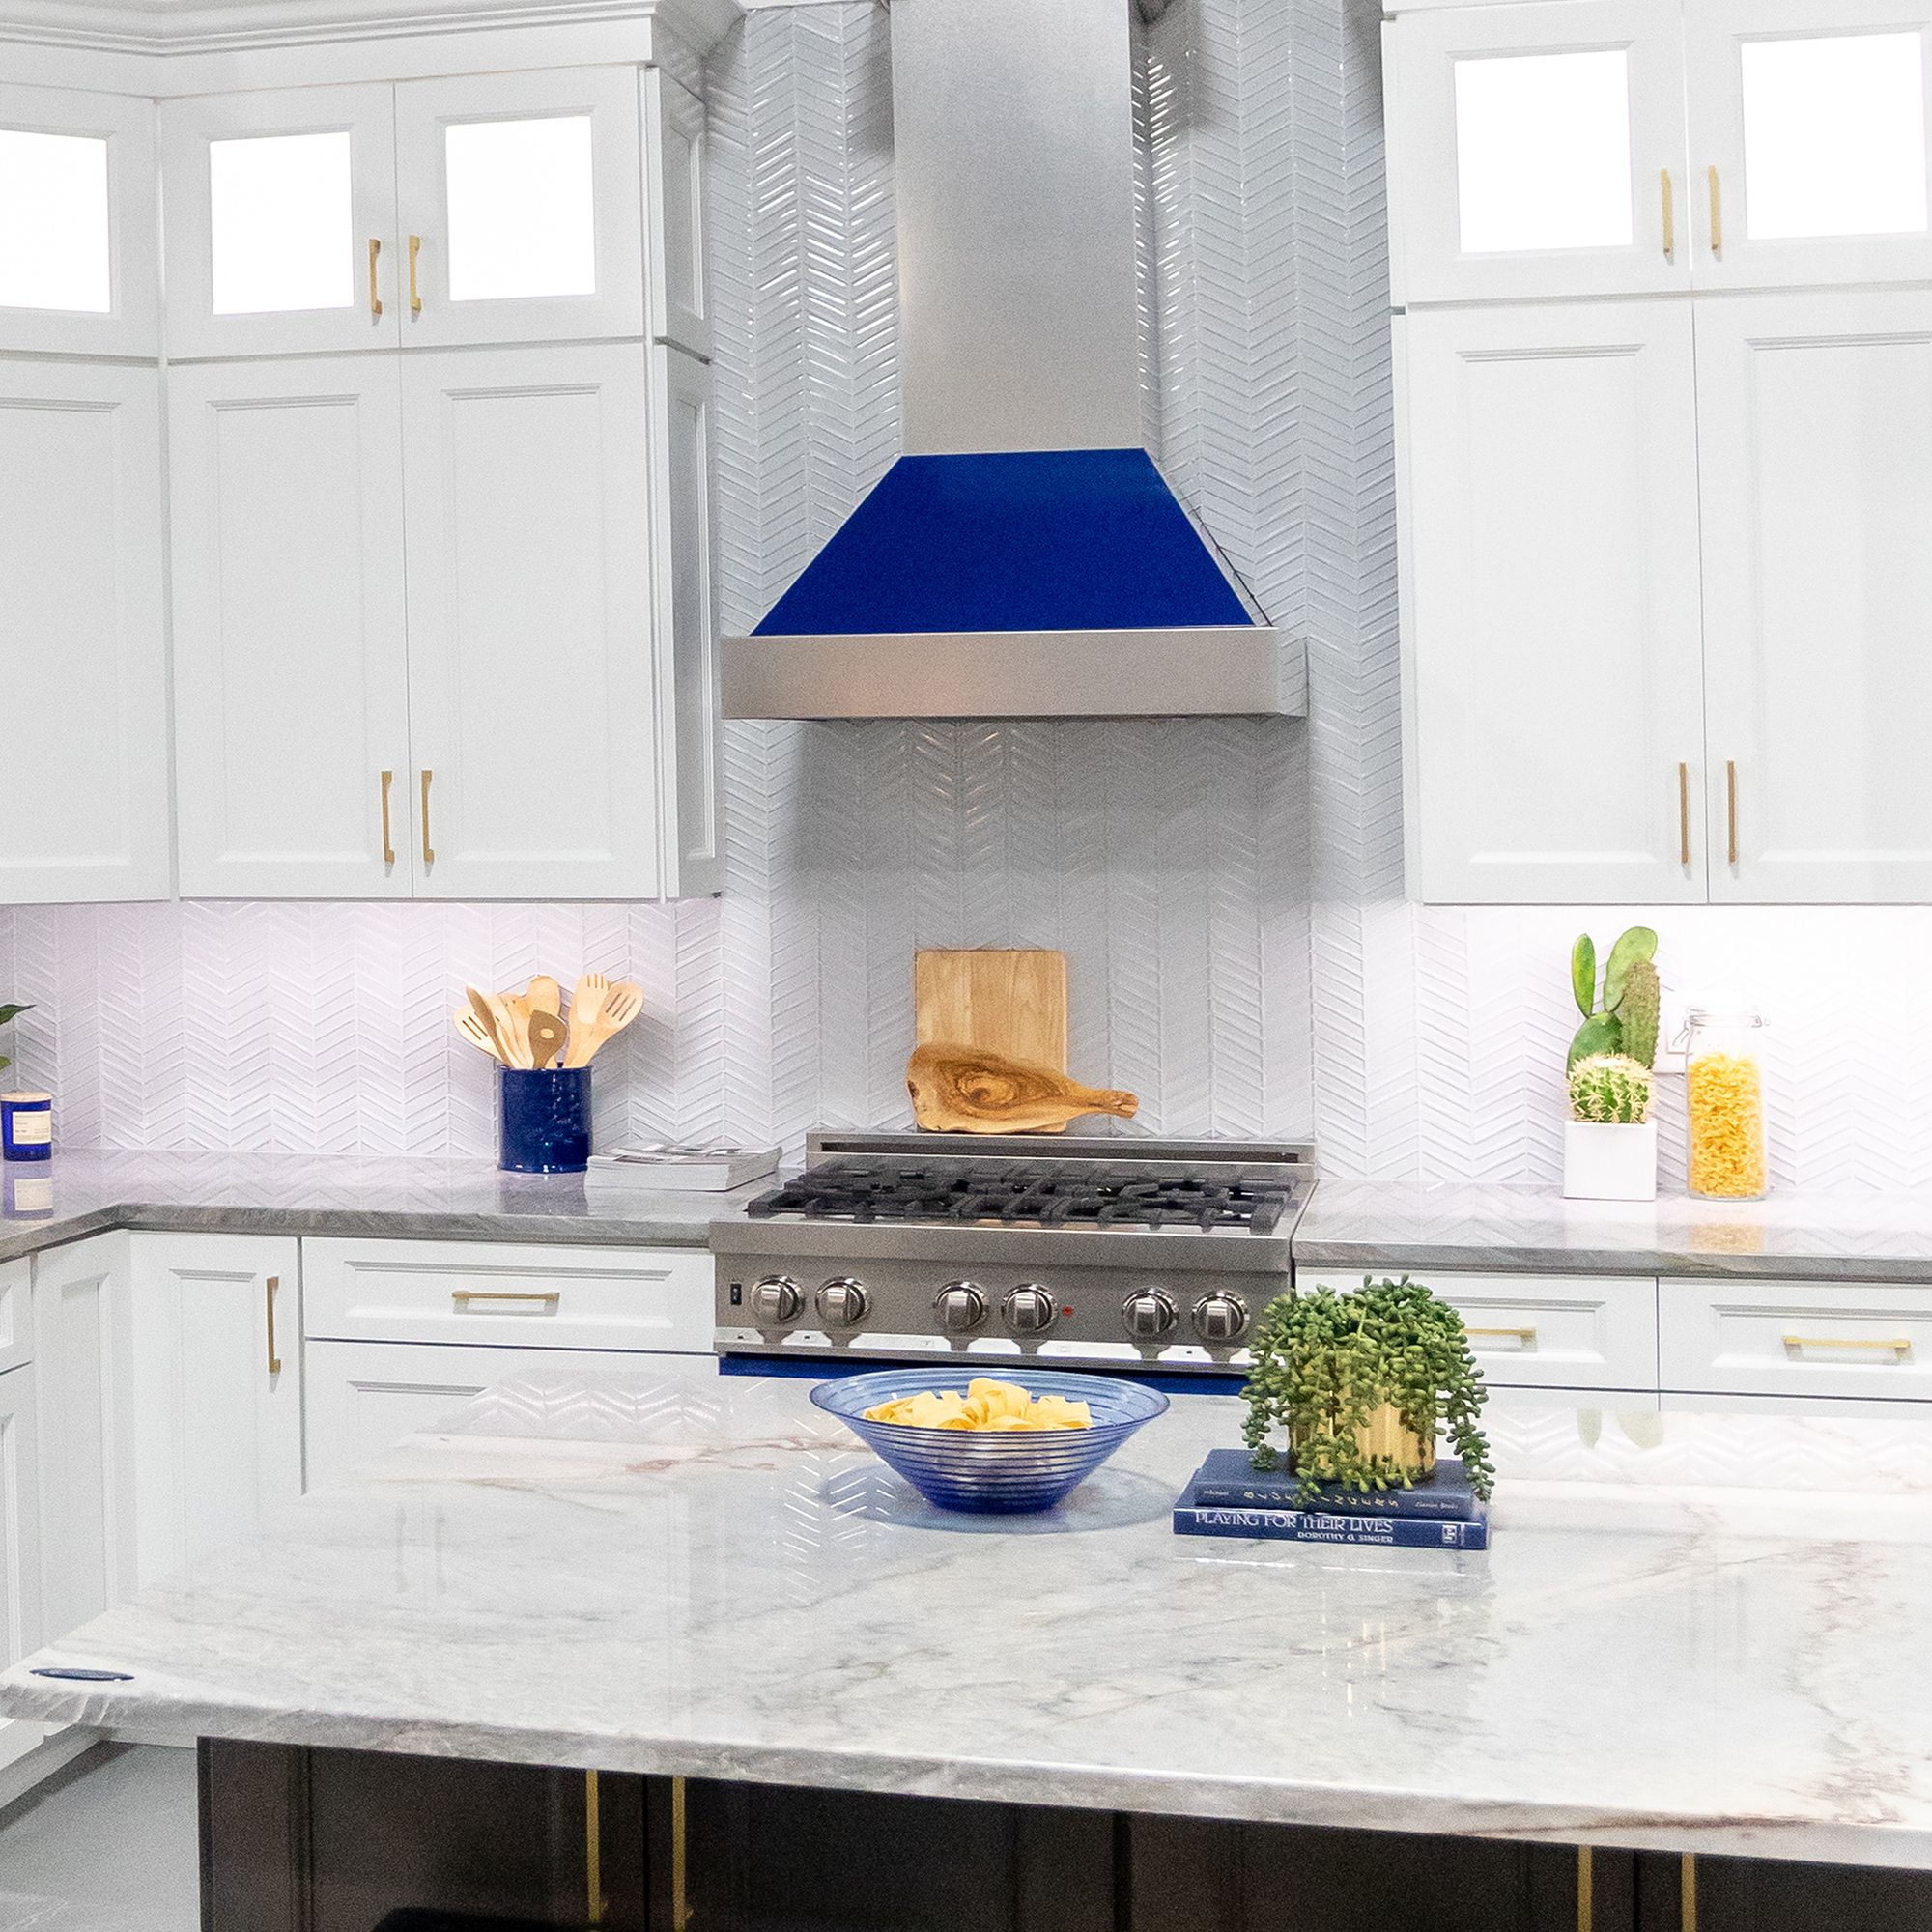 ZLINE Ducted Fingerprint Resistant Stainless Steel Range Hood with Blue Gloss Shell (8654BG) with matching blue gloss range in a white cottage-style kitchen from front.